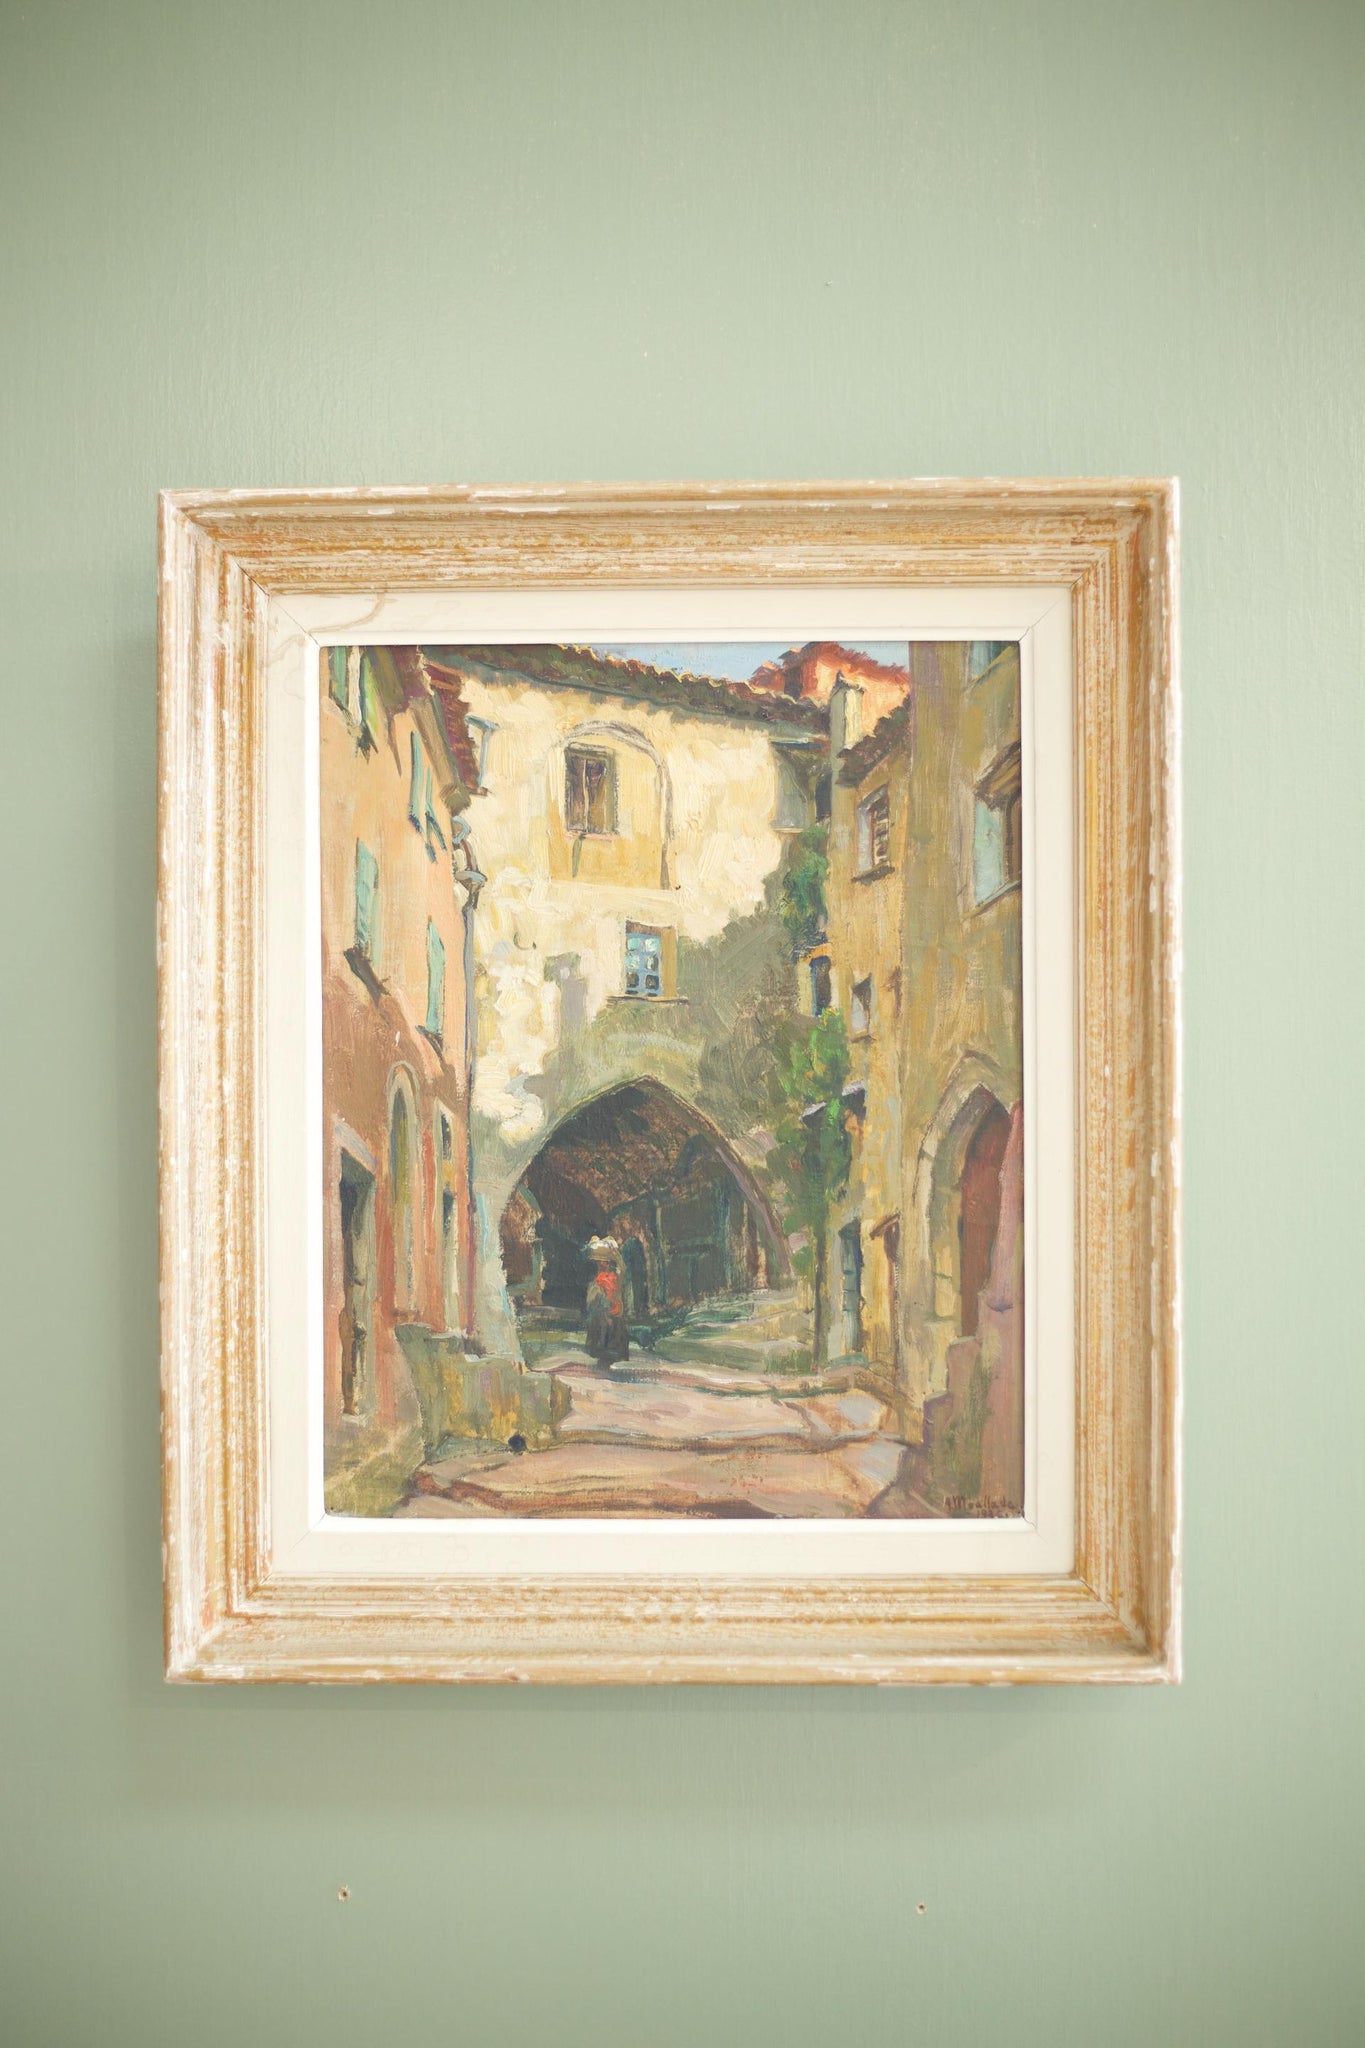 Early 20th century Oil on canvas of a French Street